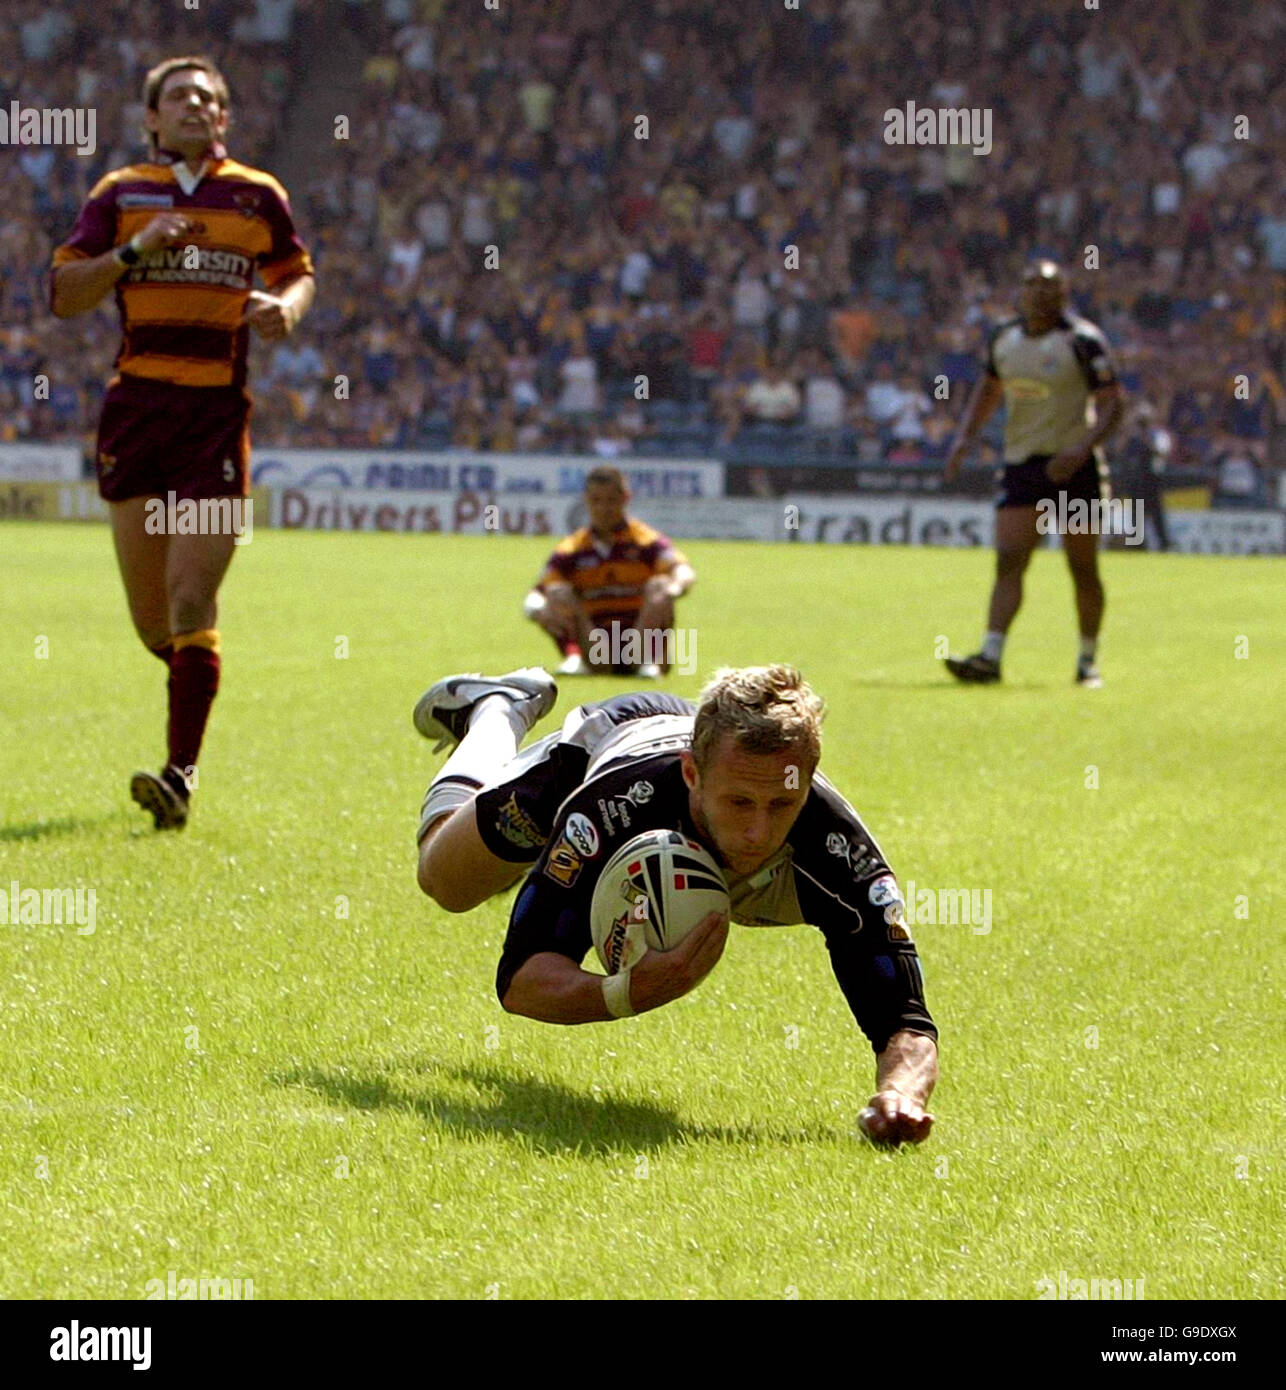 Leeds' Rob Burrow scores against Huddersfield during the Engage Super League match at Galpharm Stadium, Huddersfield. Stock Photo